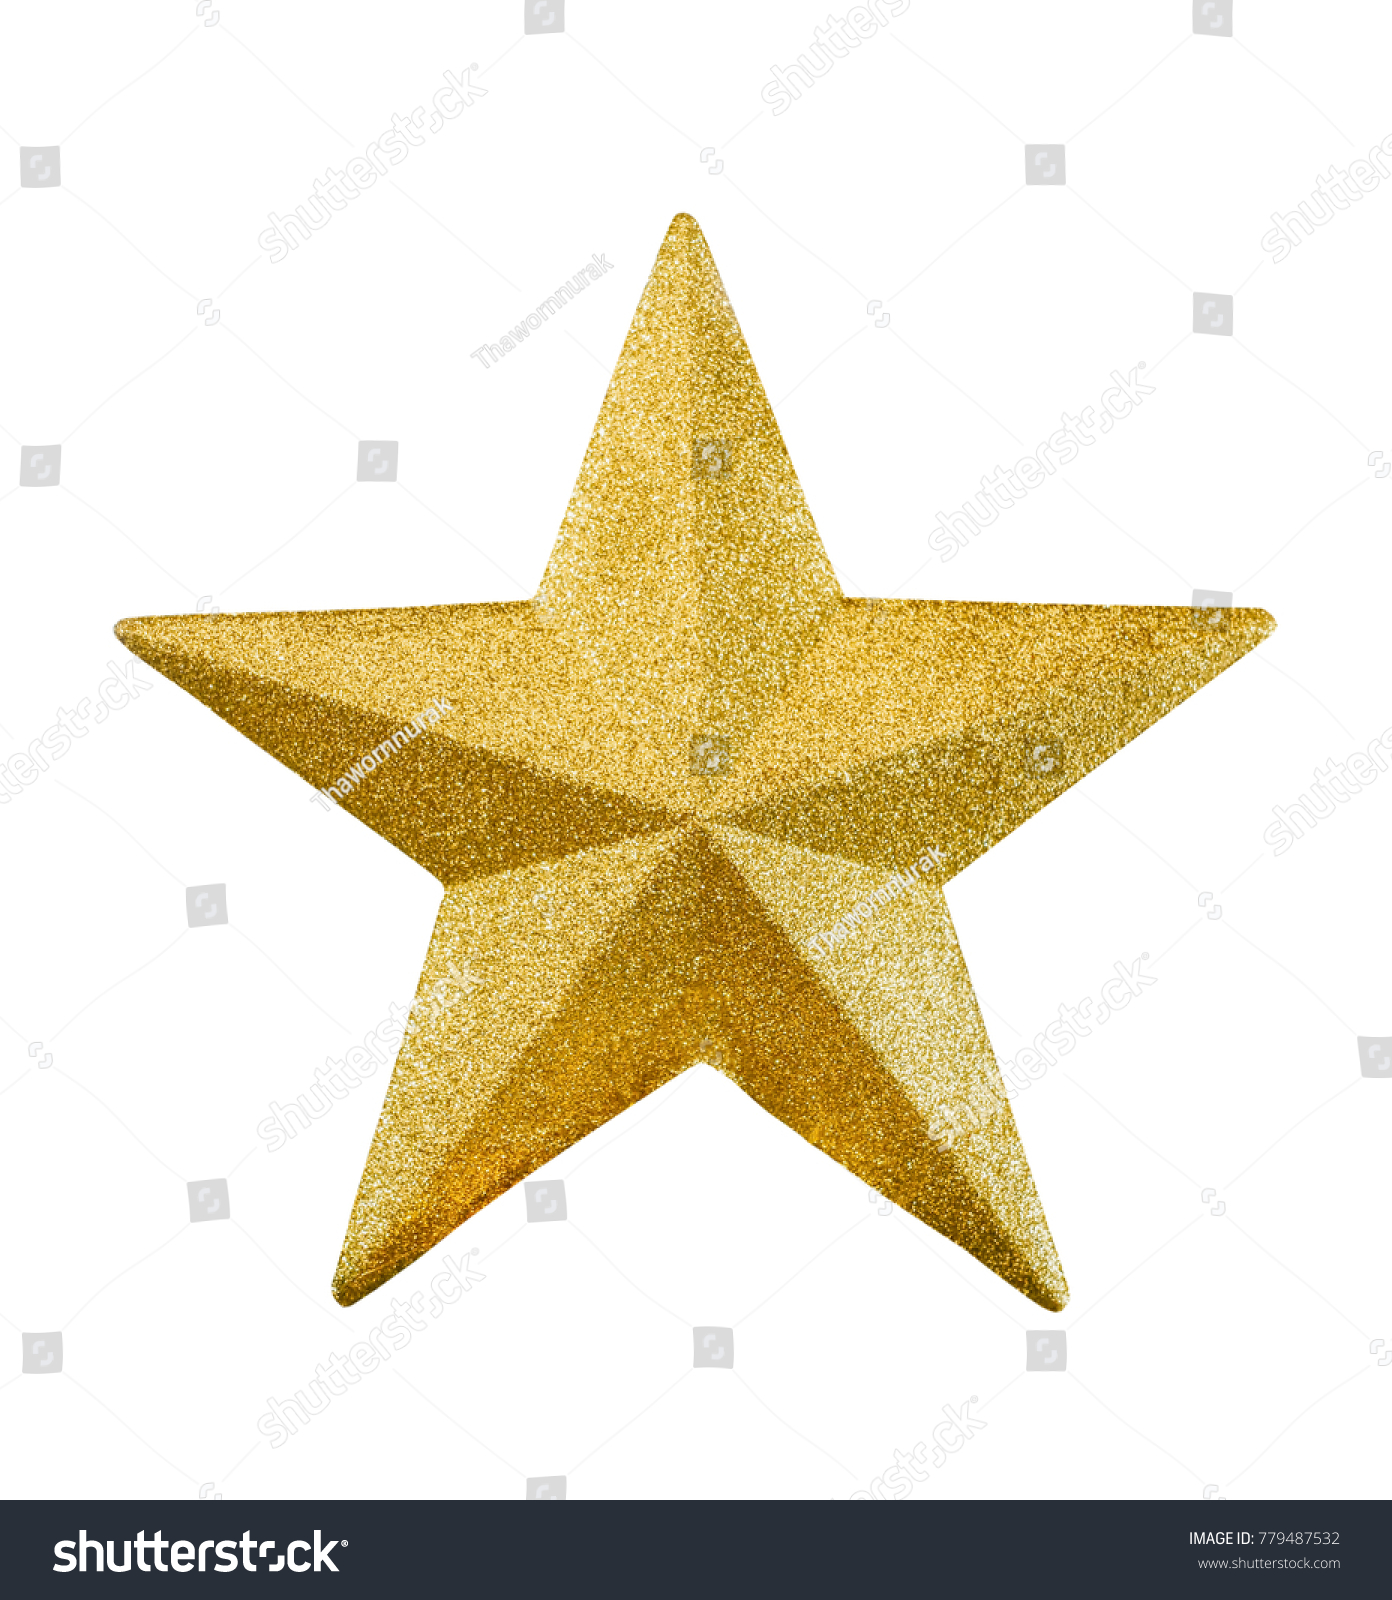 Close up golden star isolated on white background #779487532